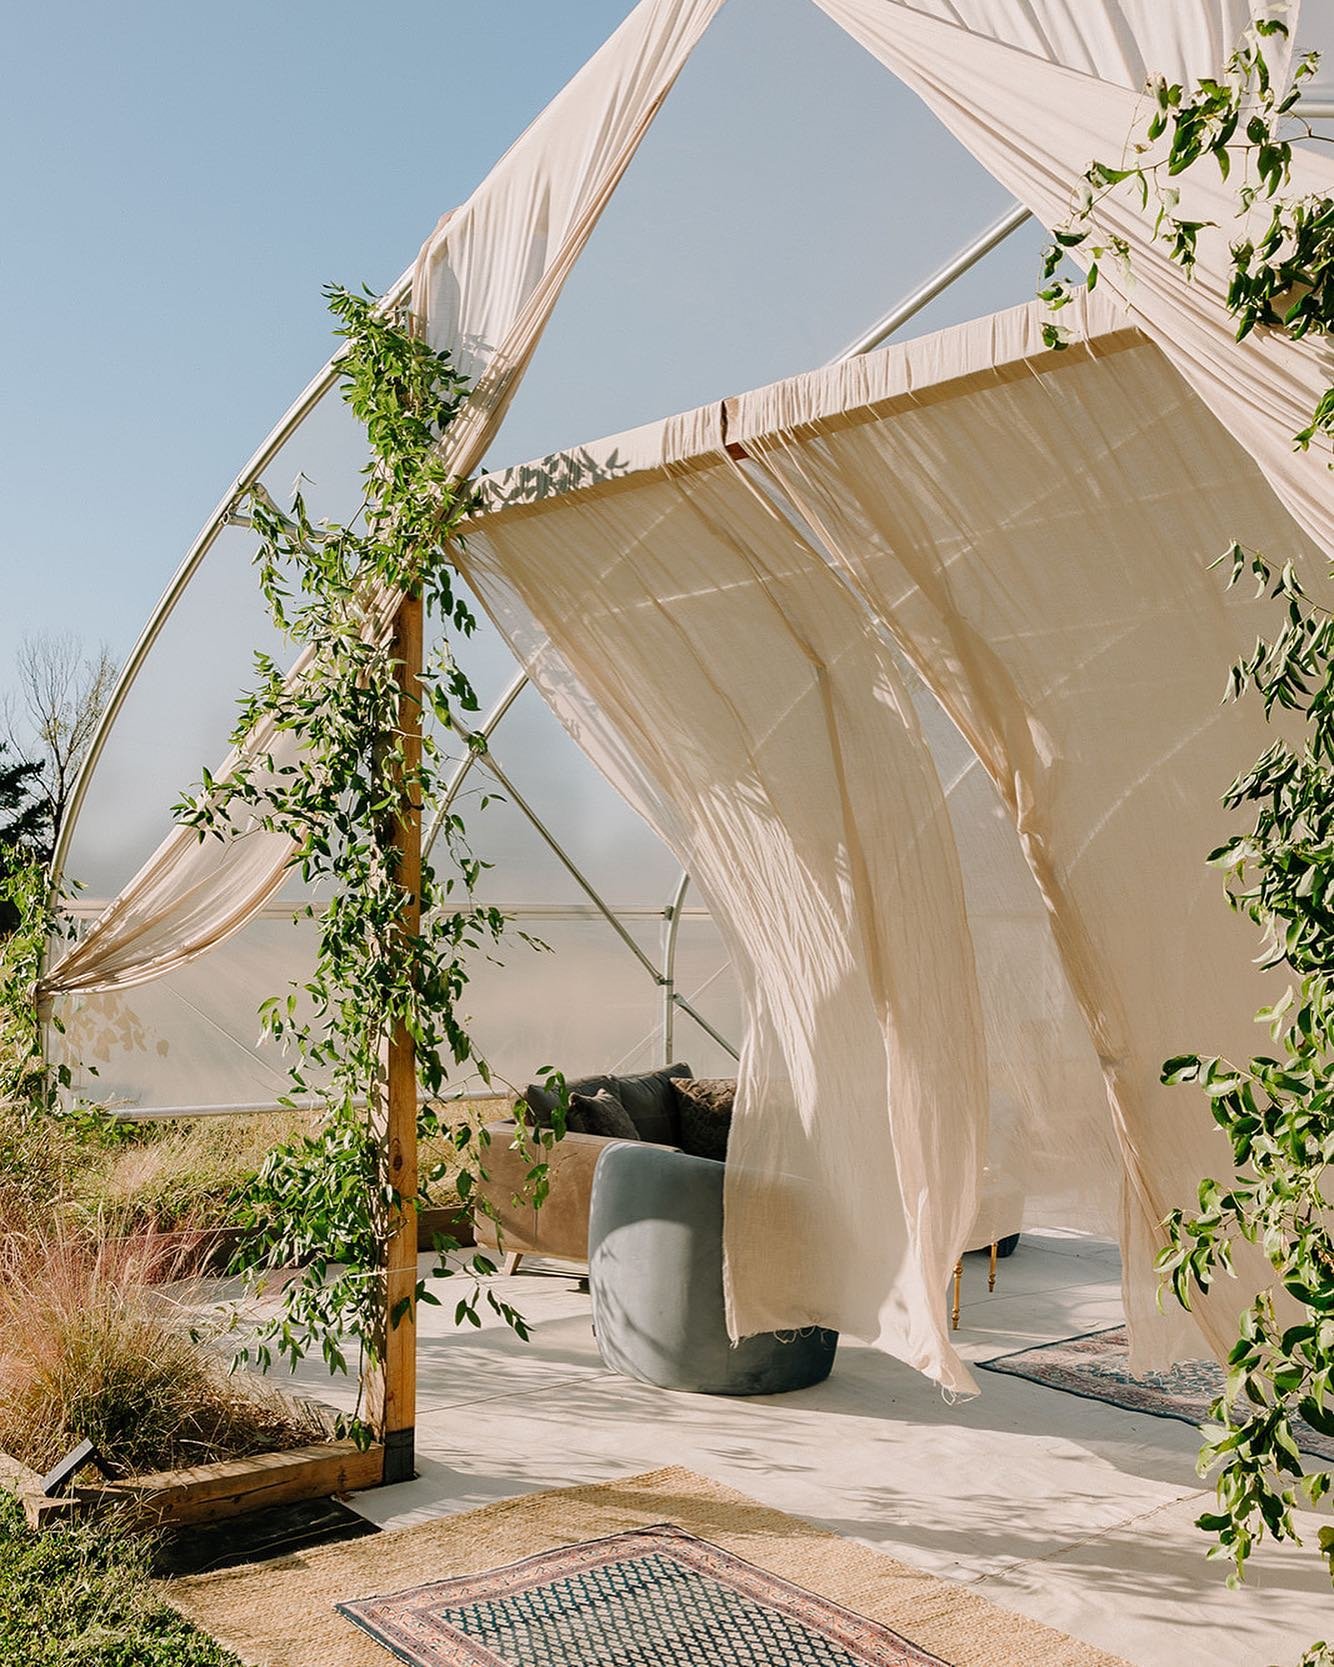 taking it home &mdash;

A current theme that&rsquo;s stood strong with our clients this past year and into the year ahead: so many are taking their weddings to their yards, to their greenhouses, back inside the walls they grew up in. 

Sure, there&rs